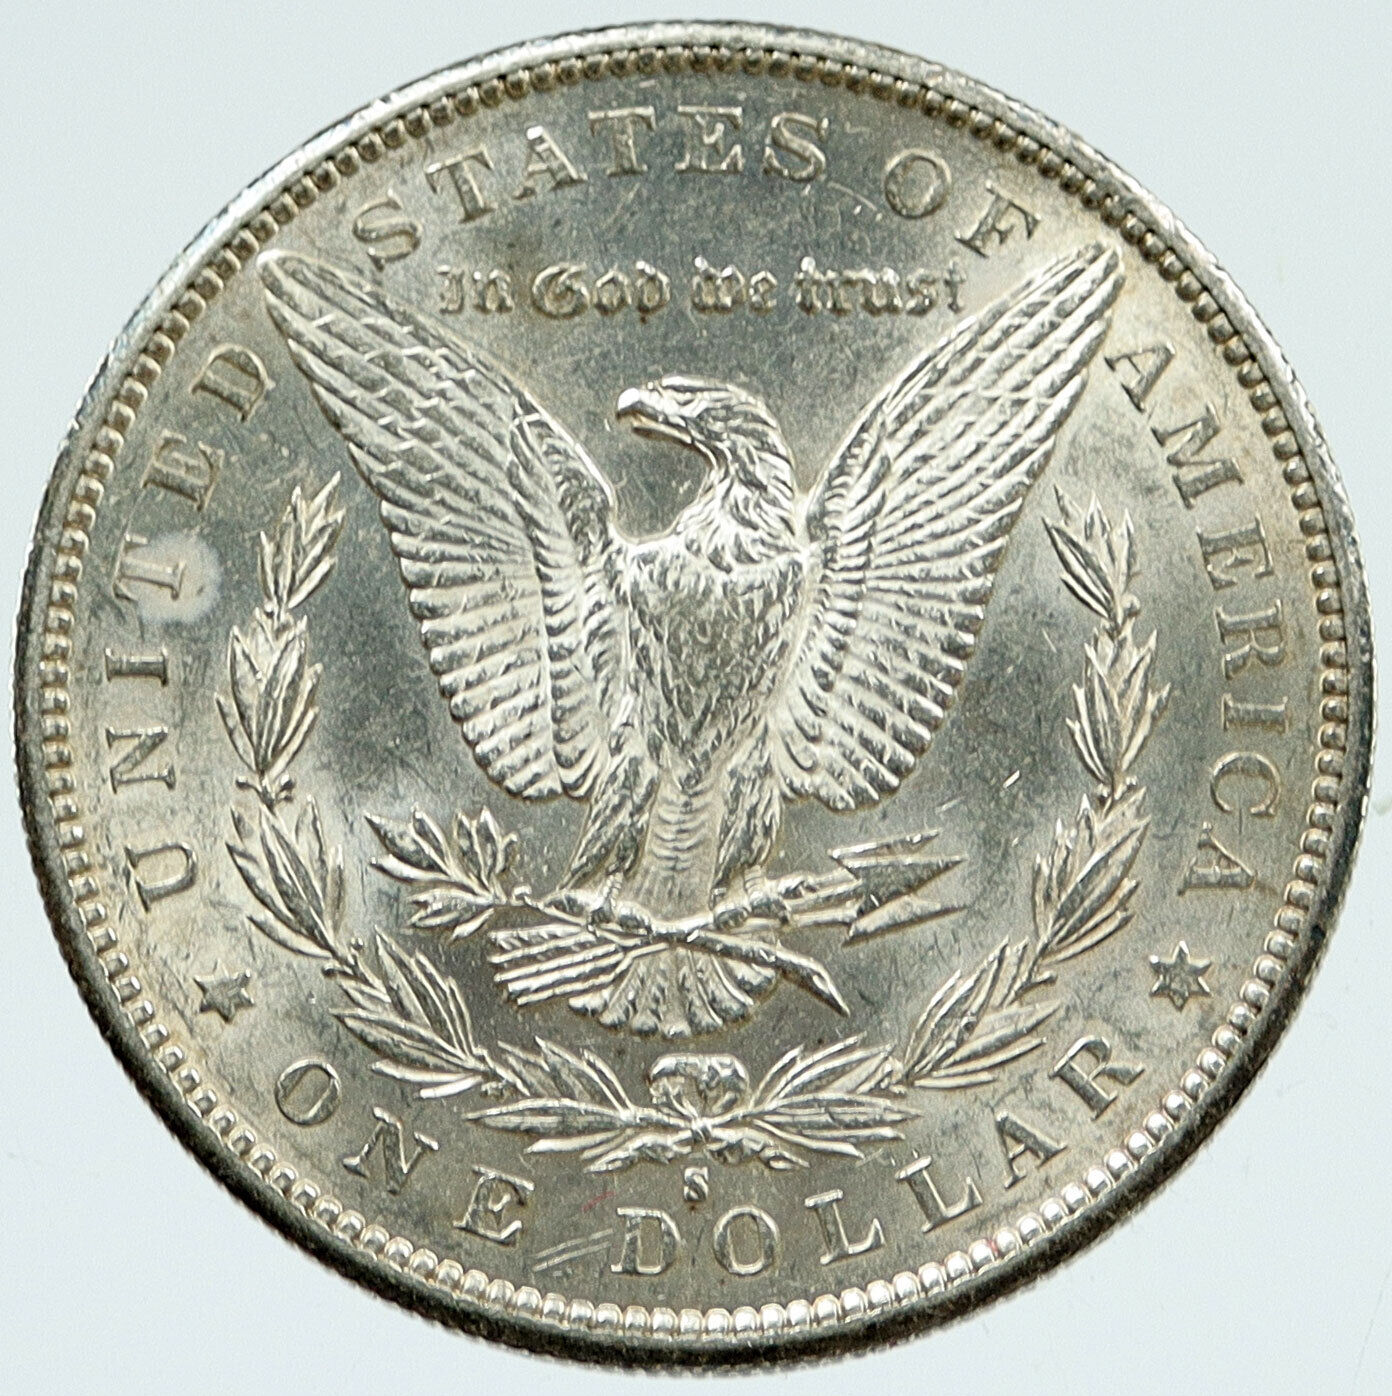 1897 S UNITED STATES of America OLD US Silver Morgan Dollar Coin EAGLE i117142